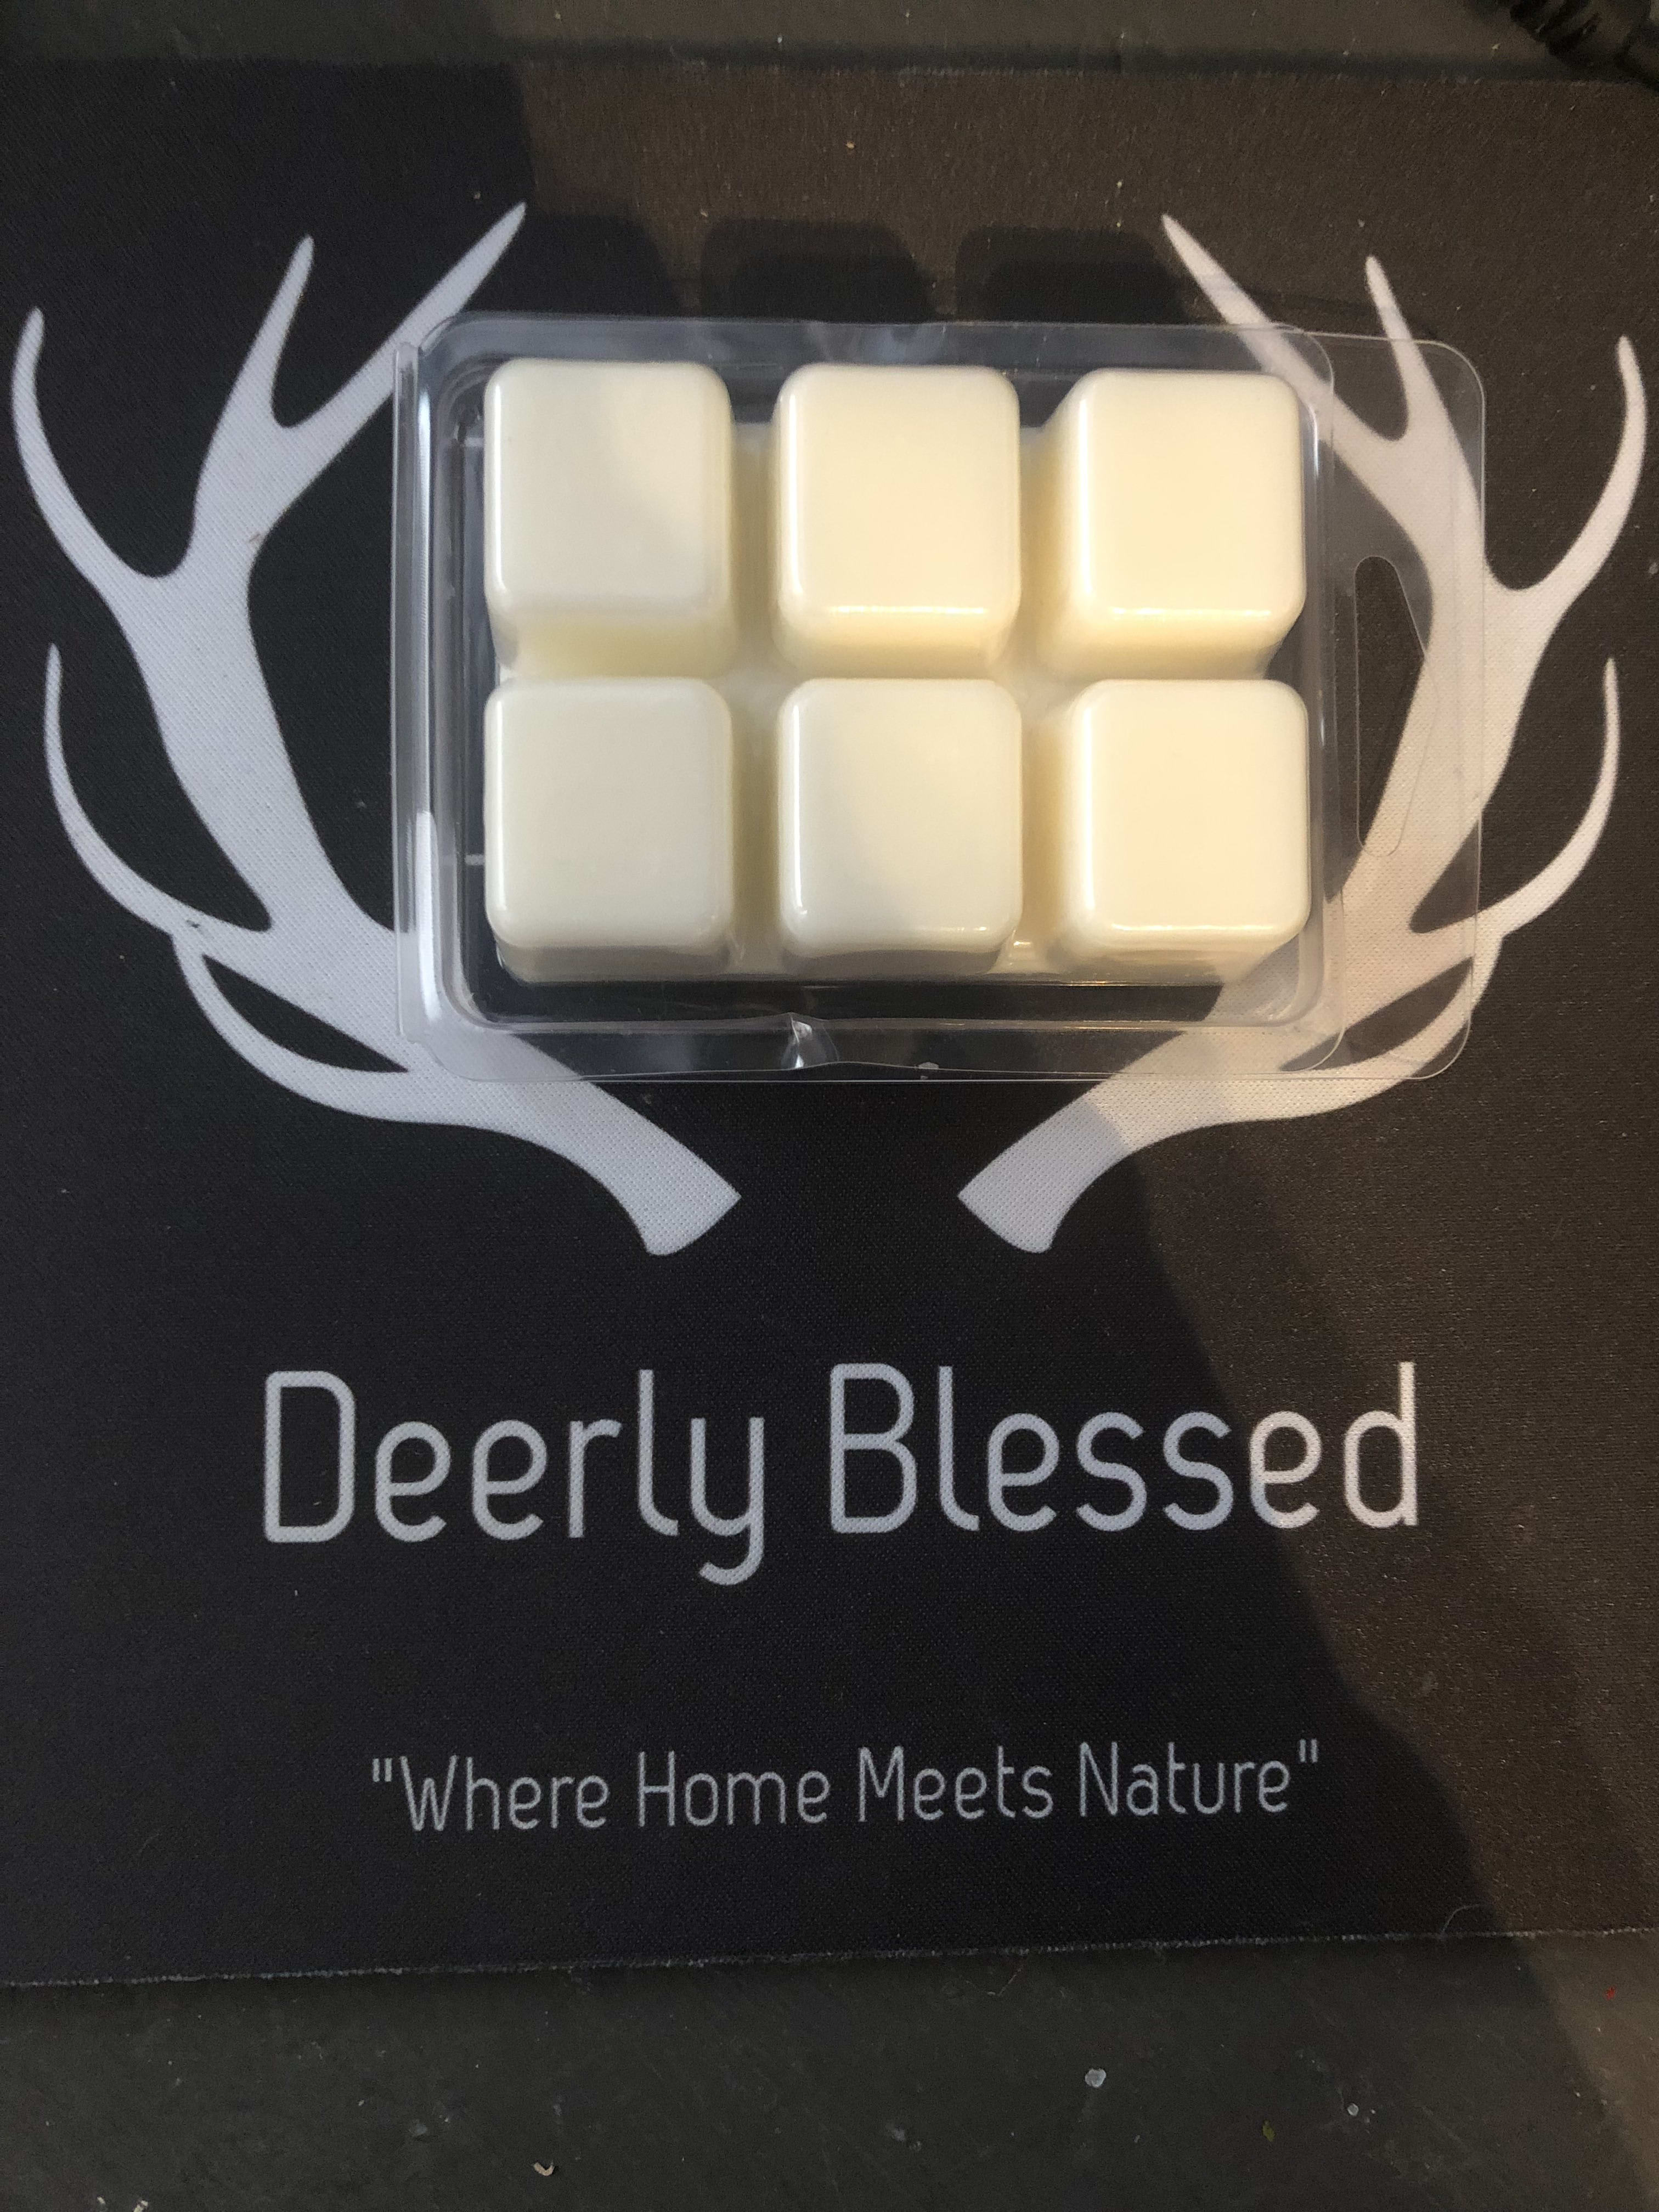 Coffee Scented Wax Cubes (6 Pack)